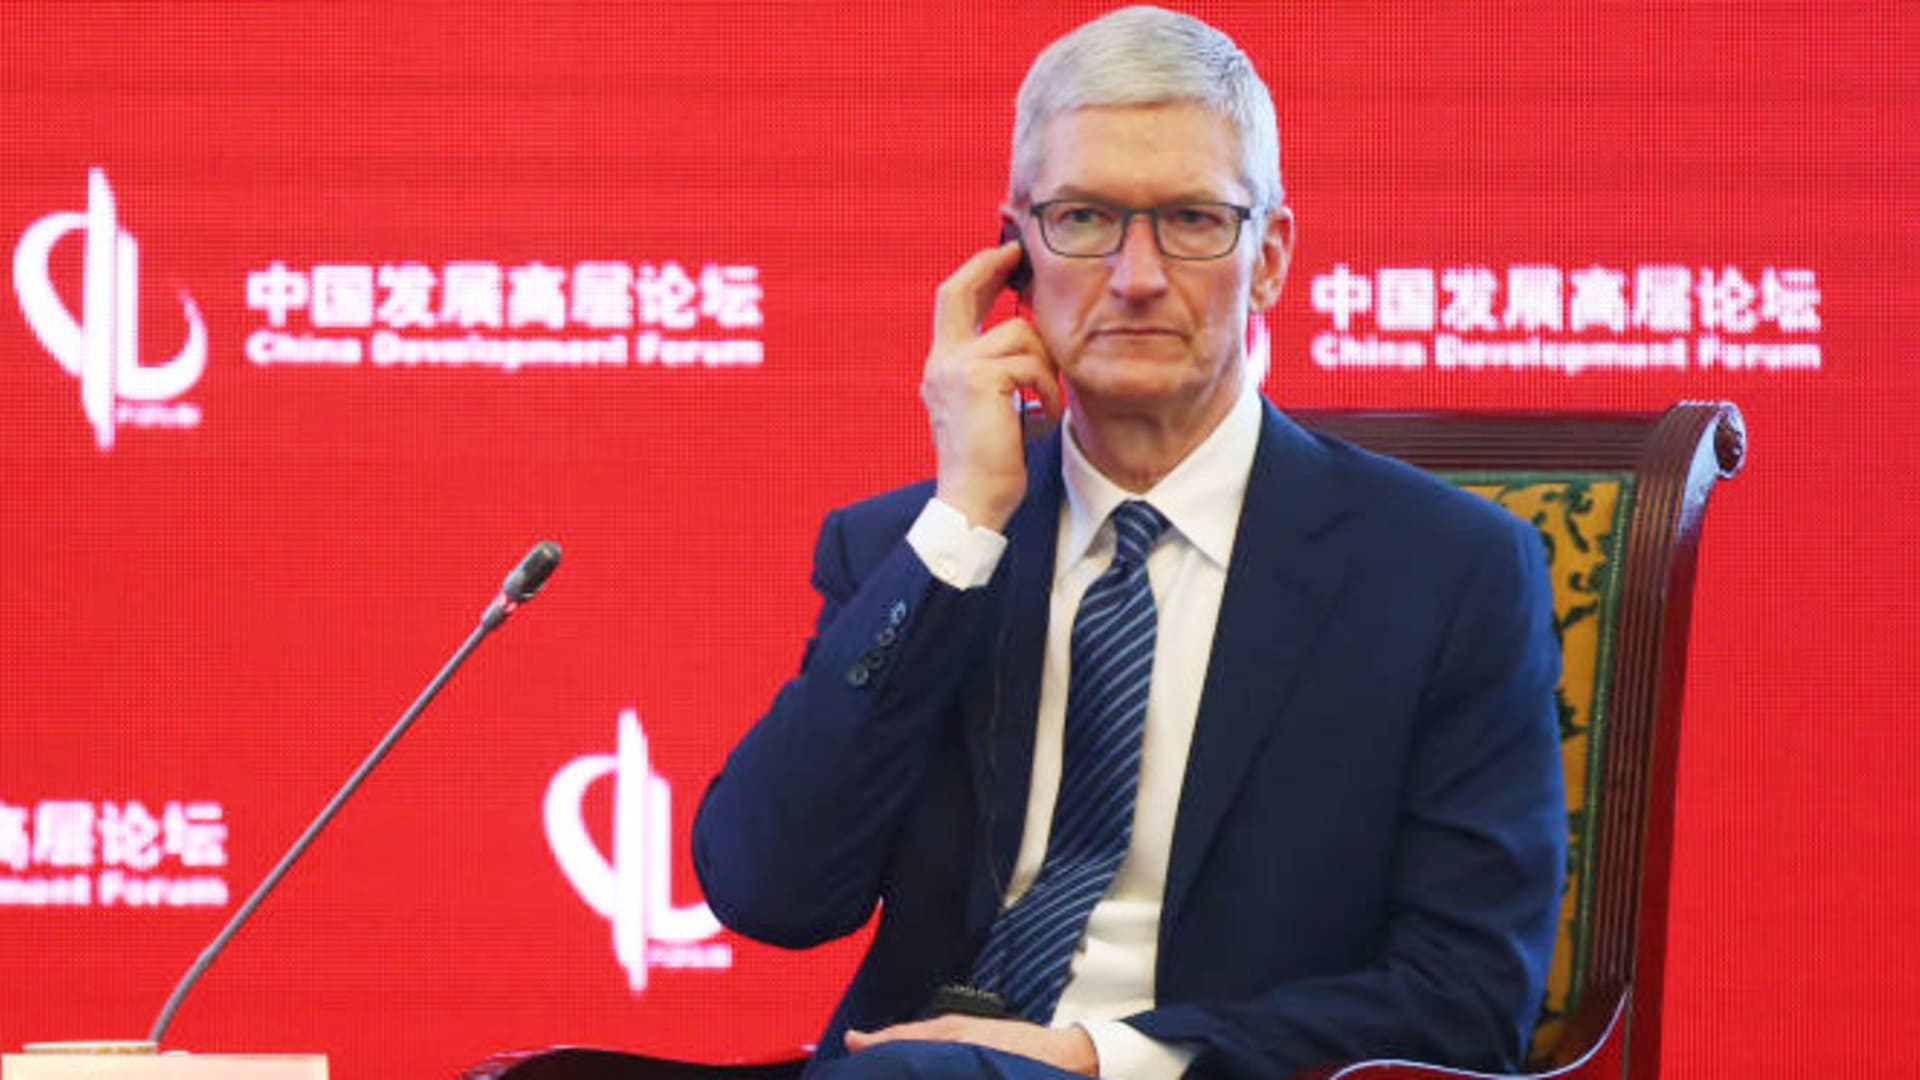 China says it hasn't banned iPhones or foreign devices for government staff